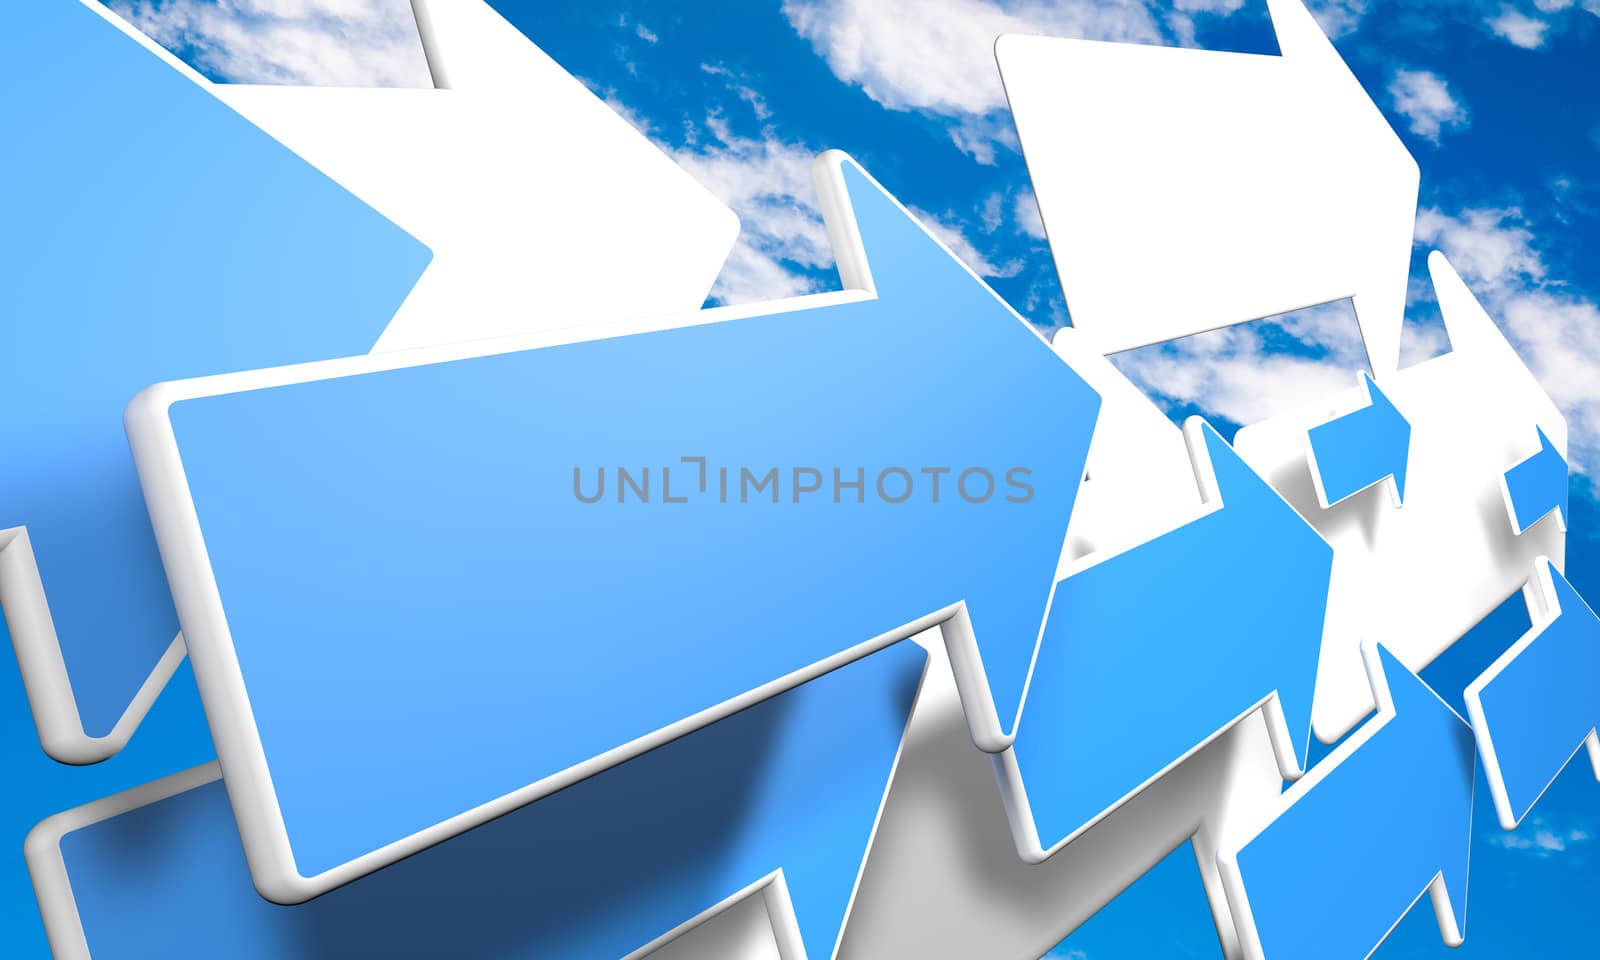 3d render with blue and white arrows flying upwards in a blue sky with clouds